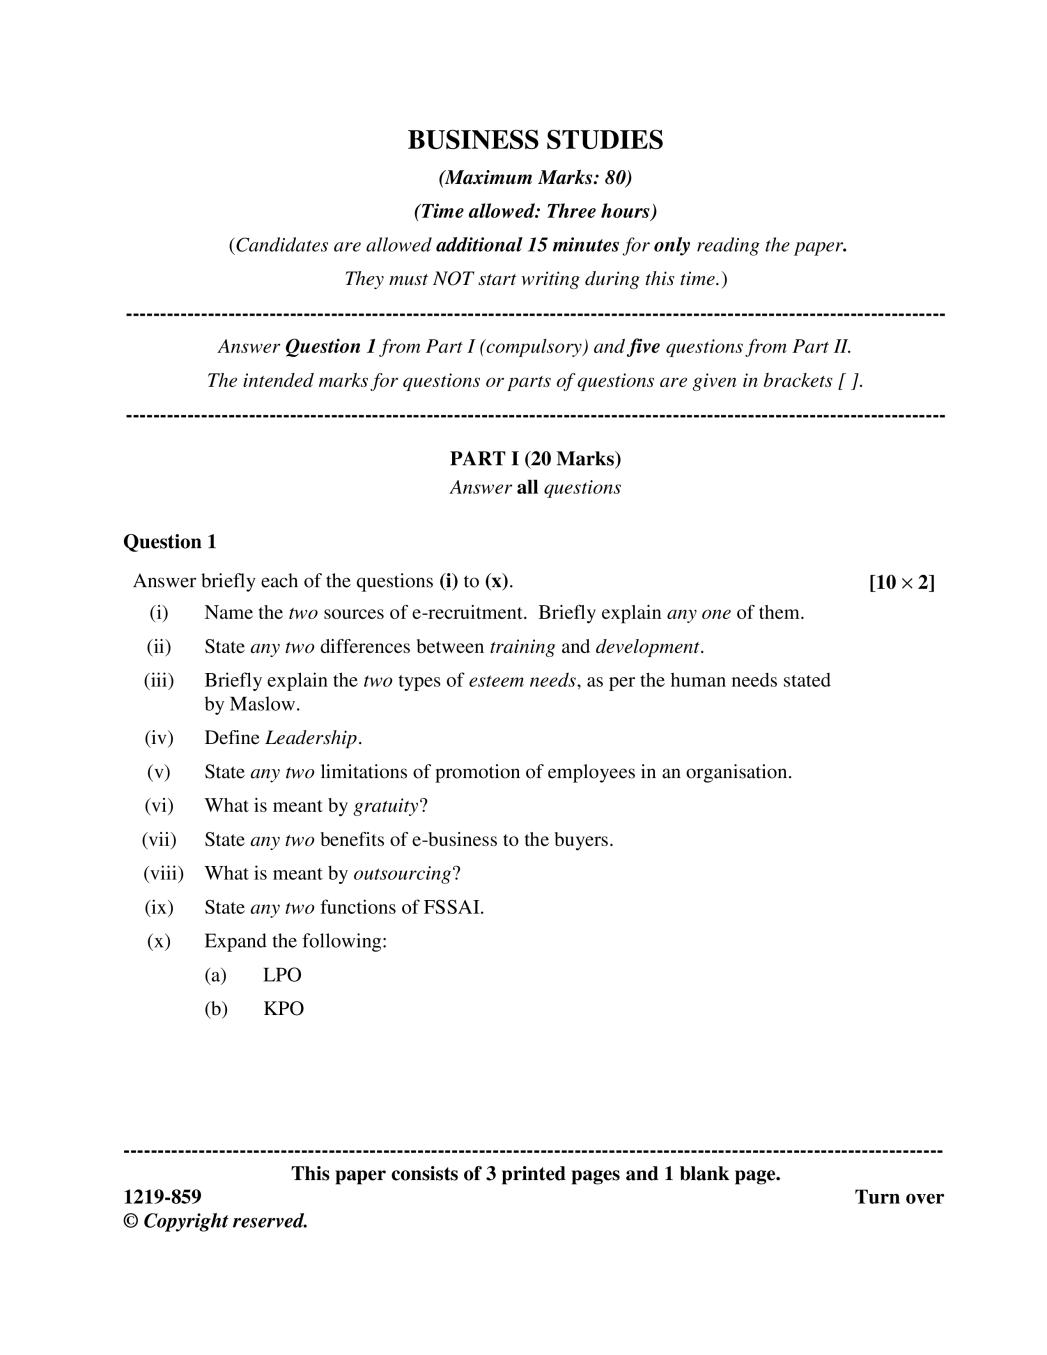 ISC Class 12 Specimen Paper 2019 for Business Studies - Page 1